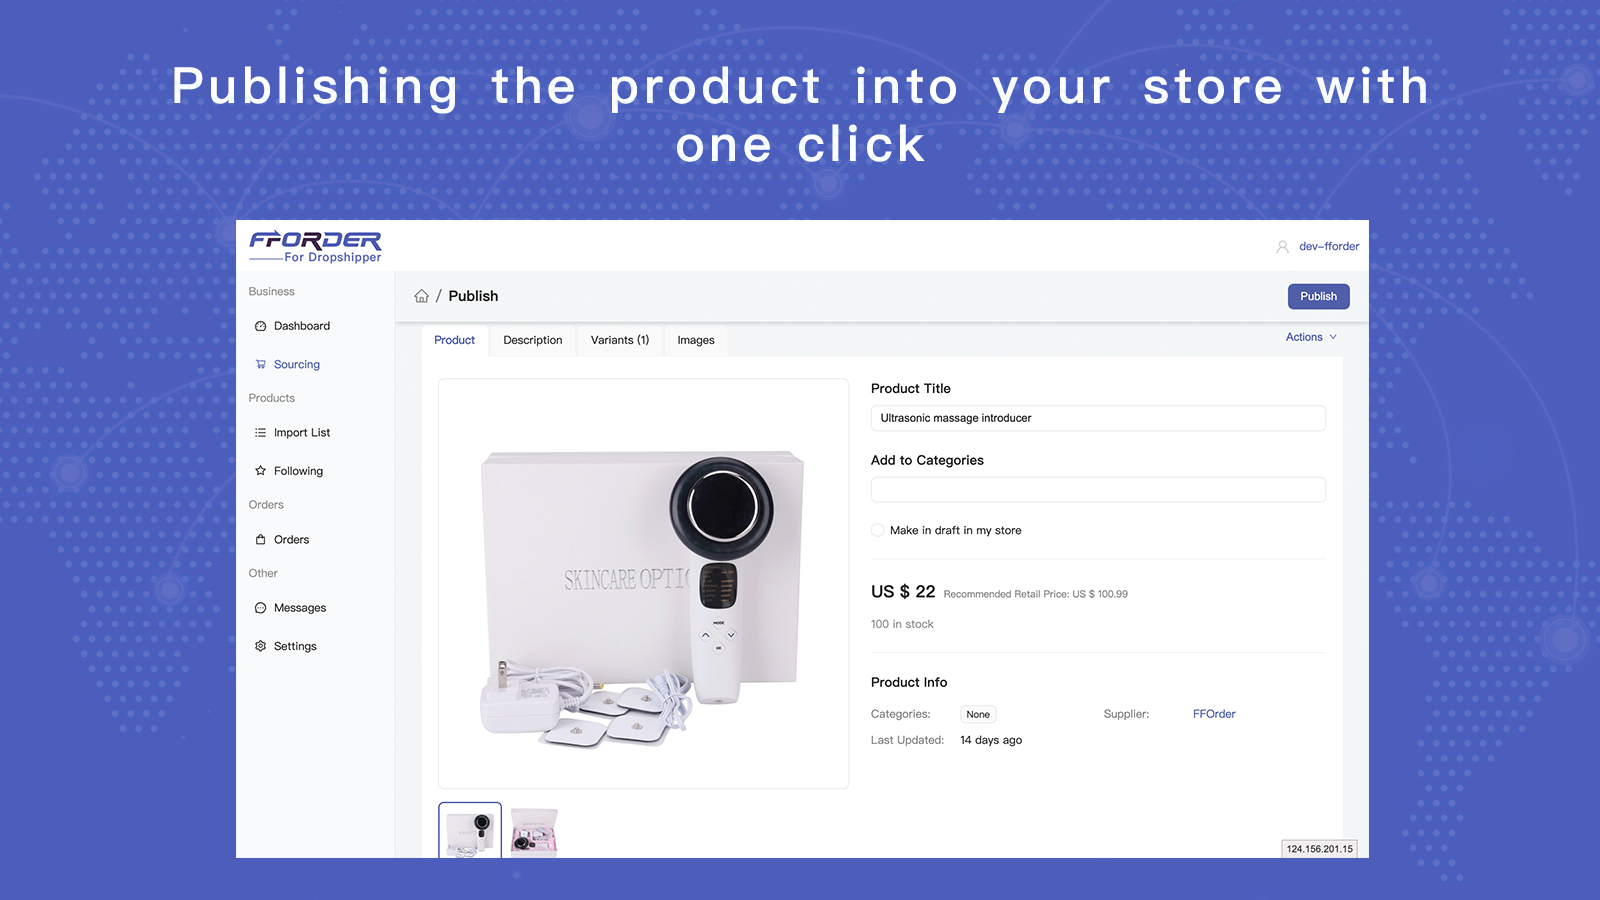 Publishing the product into your store with one click